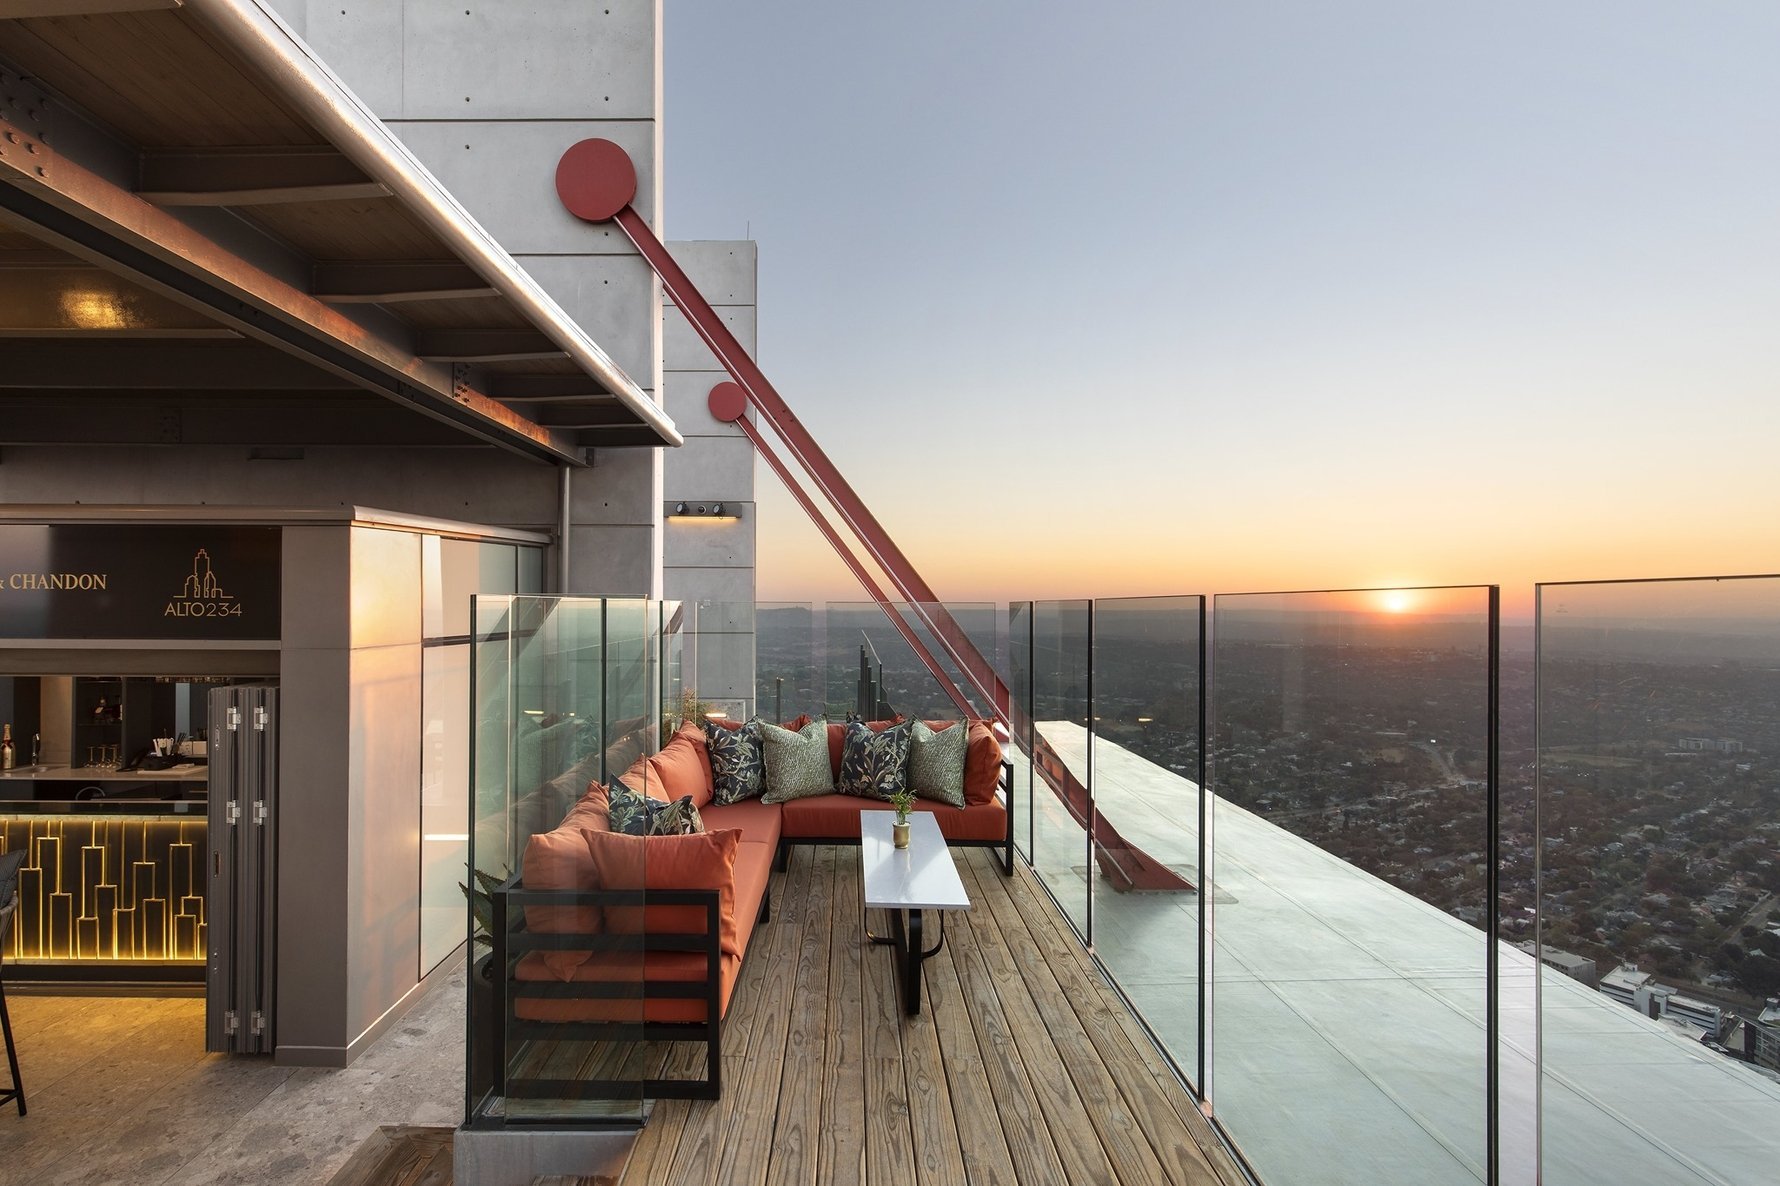  Drinks from a dizzying height at Africa's tallest urban bar, Alto234. Photo: Alto234.